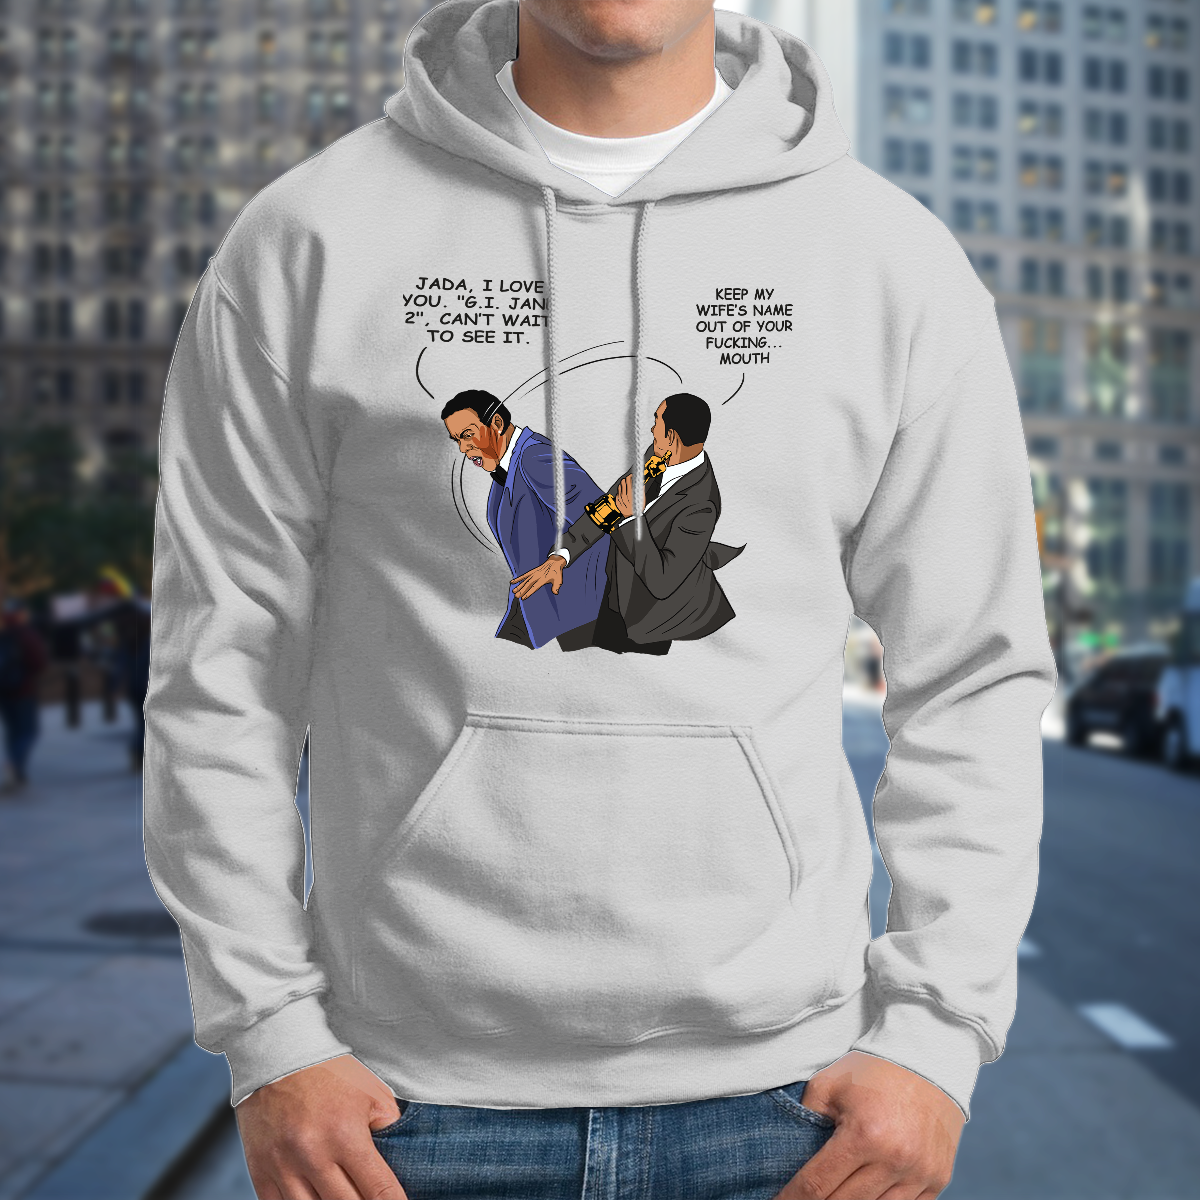 Keep My Wife’s Name Out Of Your Fucking Mouth - Standard Hoodie